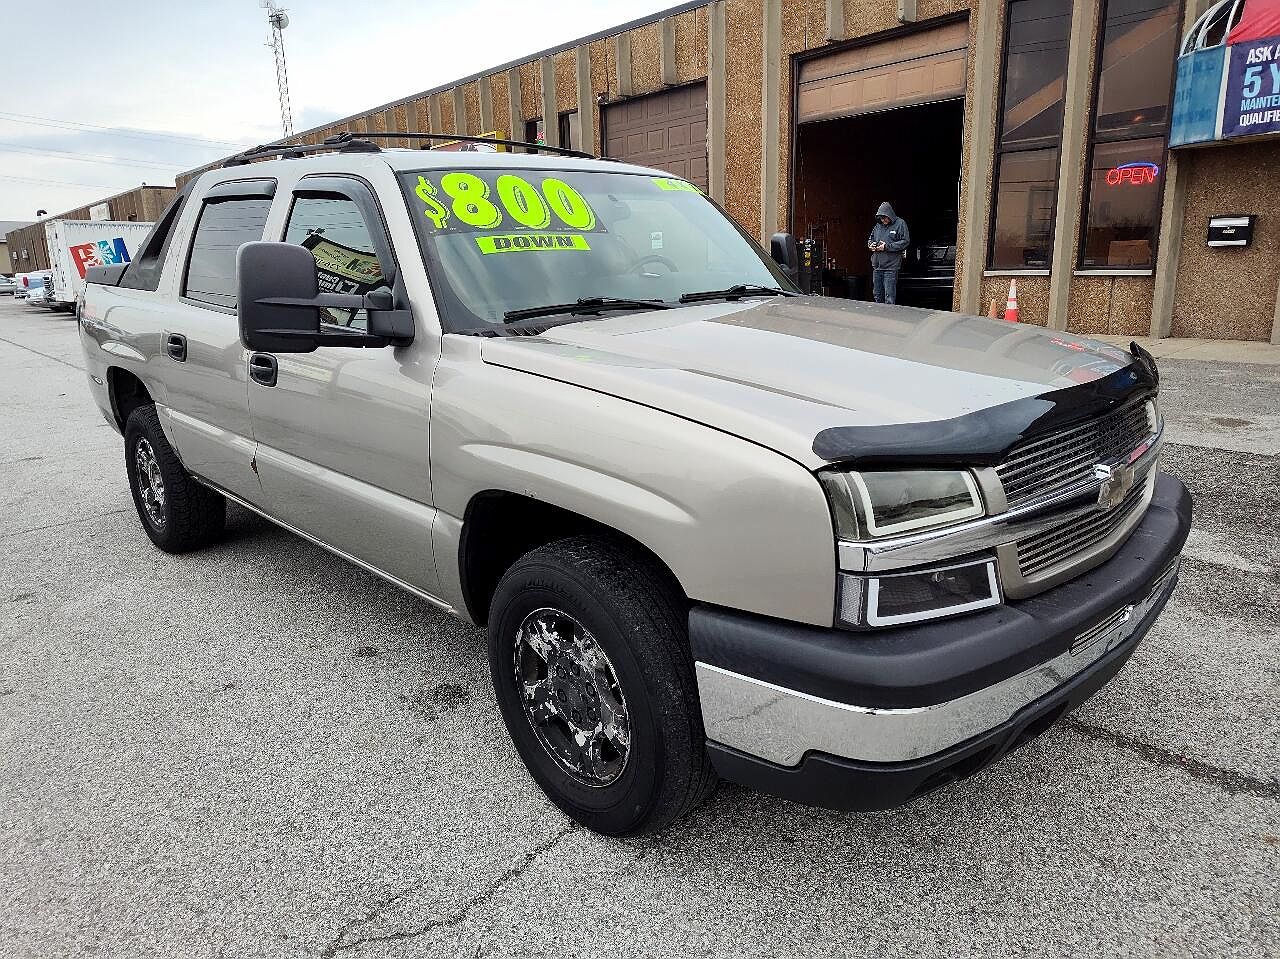 2003 Chevrolet Avalanche 1500 null image 1